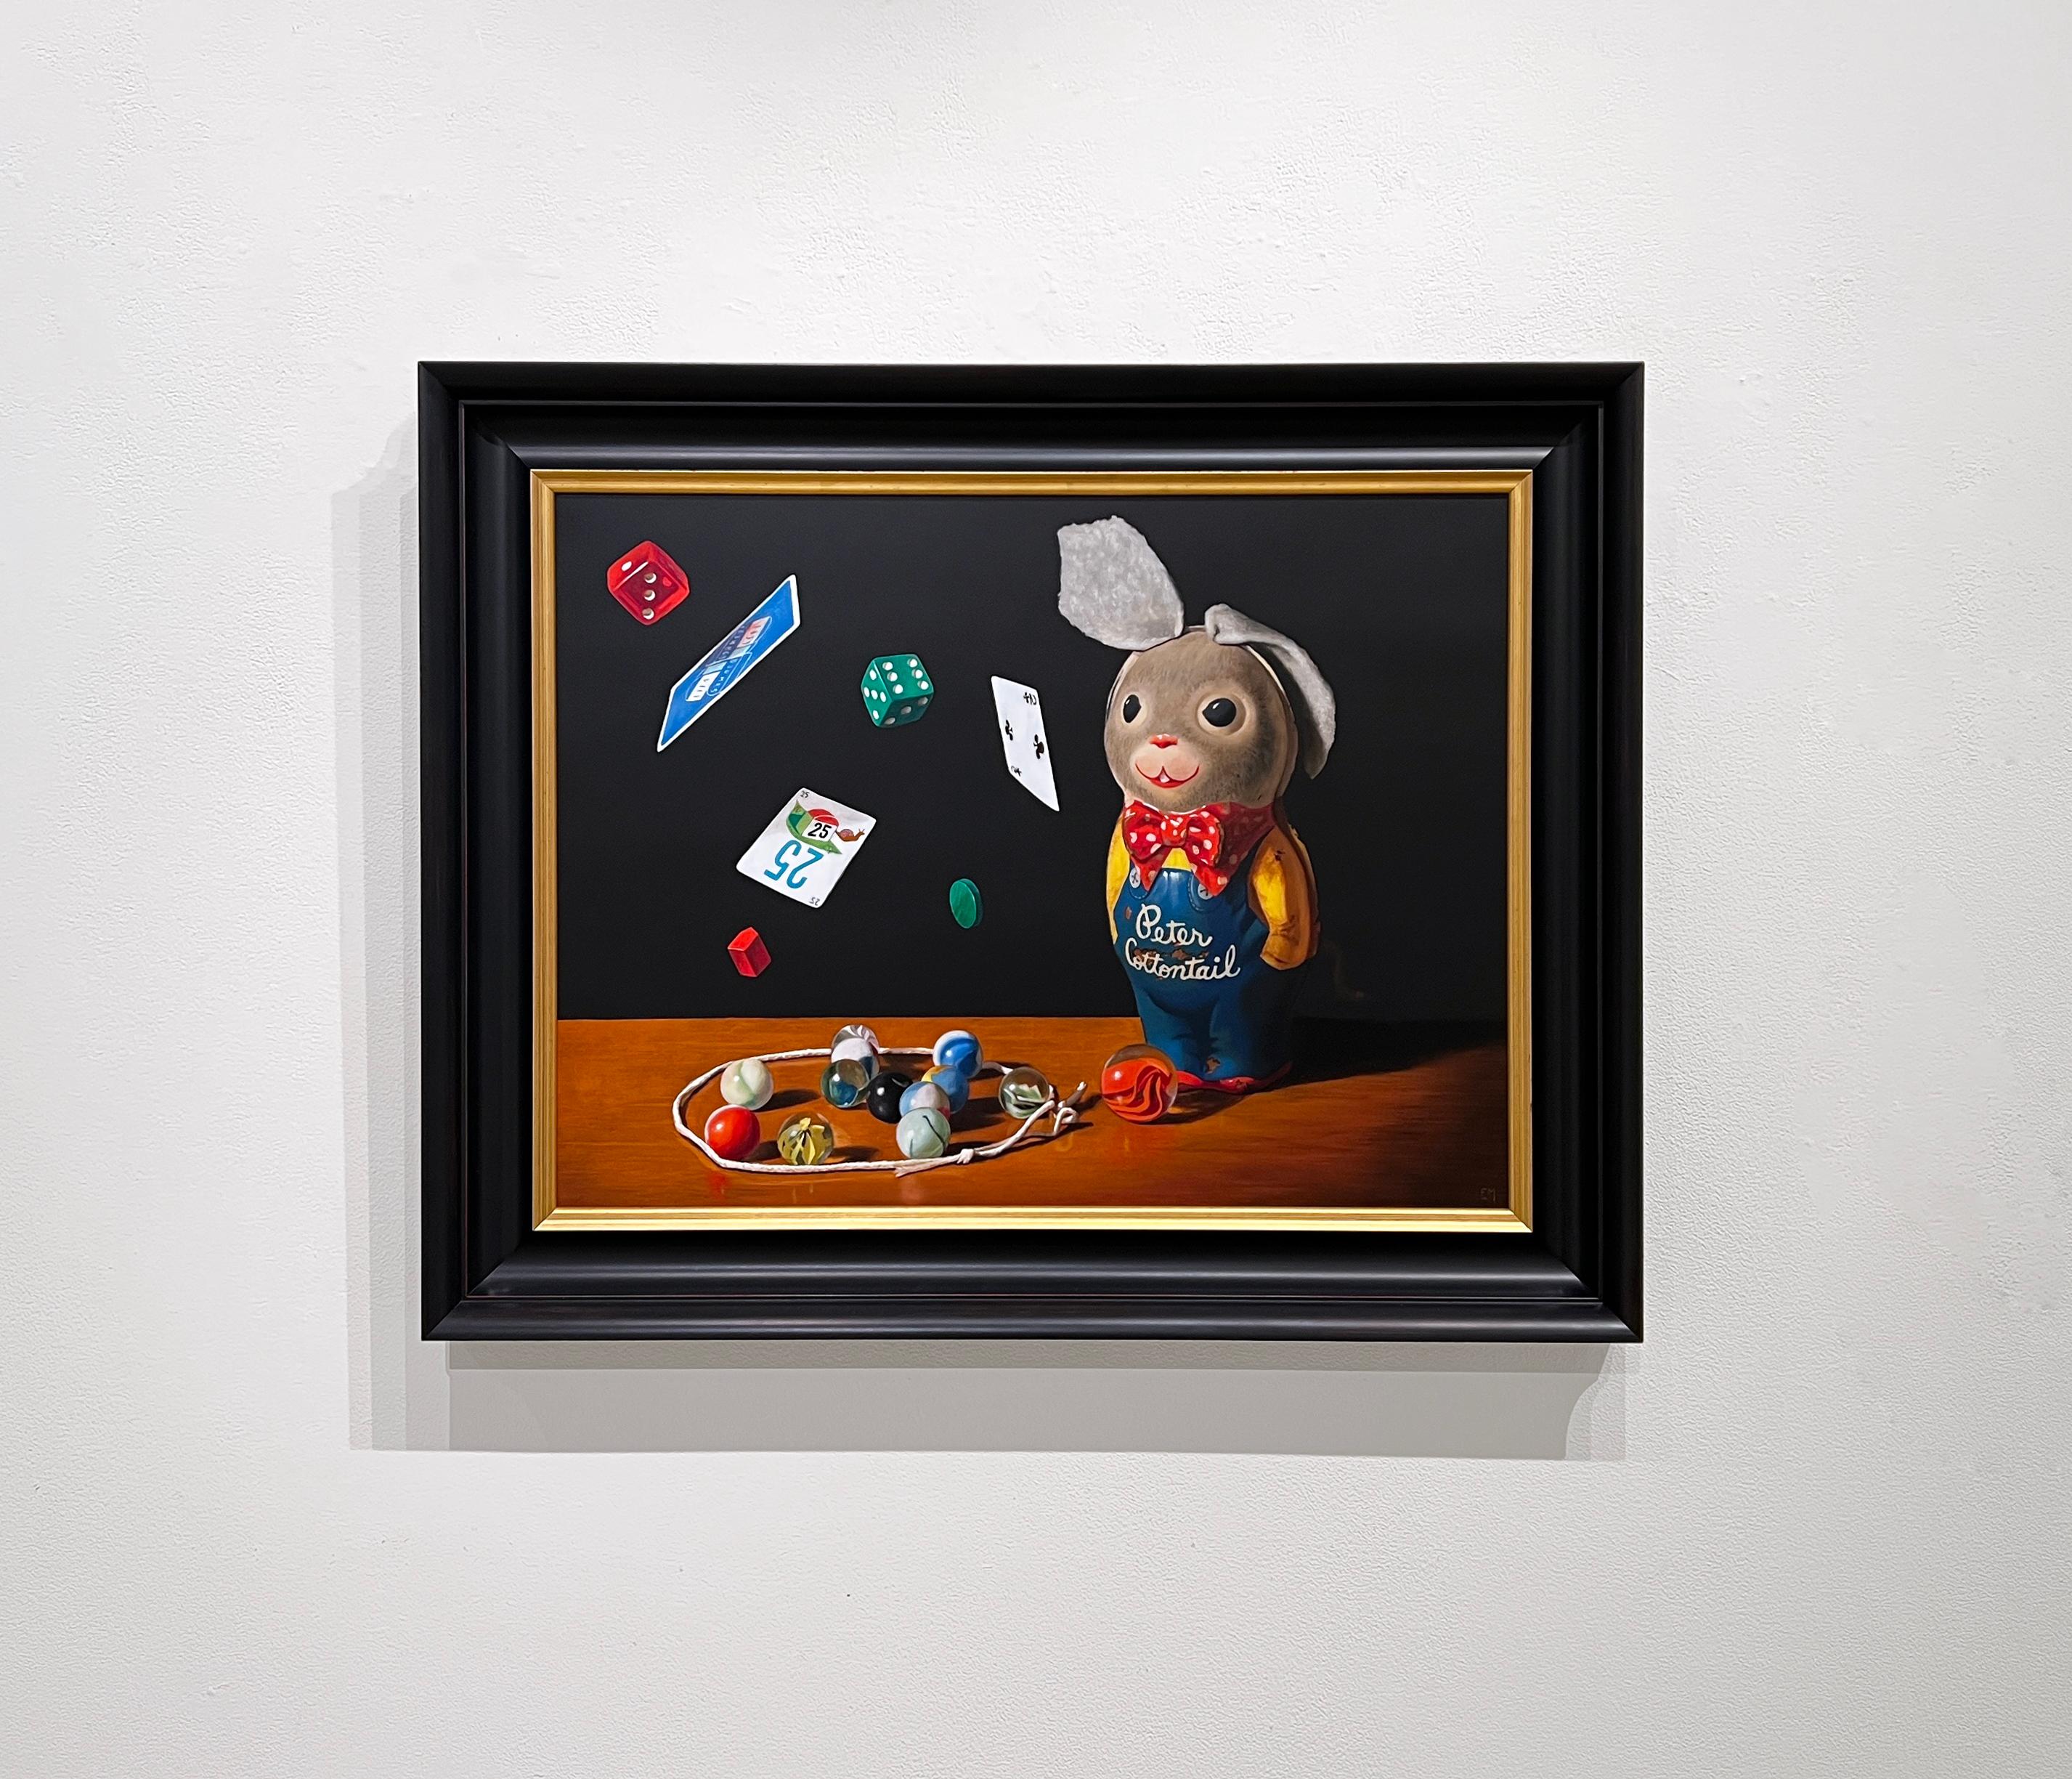 PLAY, BOY BUNNY - Contemporary Realism / Humorous Still Life  - Painting by Elizabeth McGhee